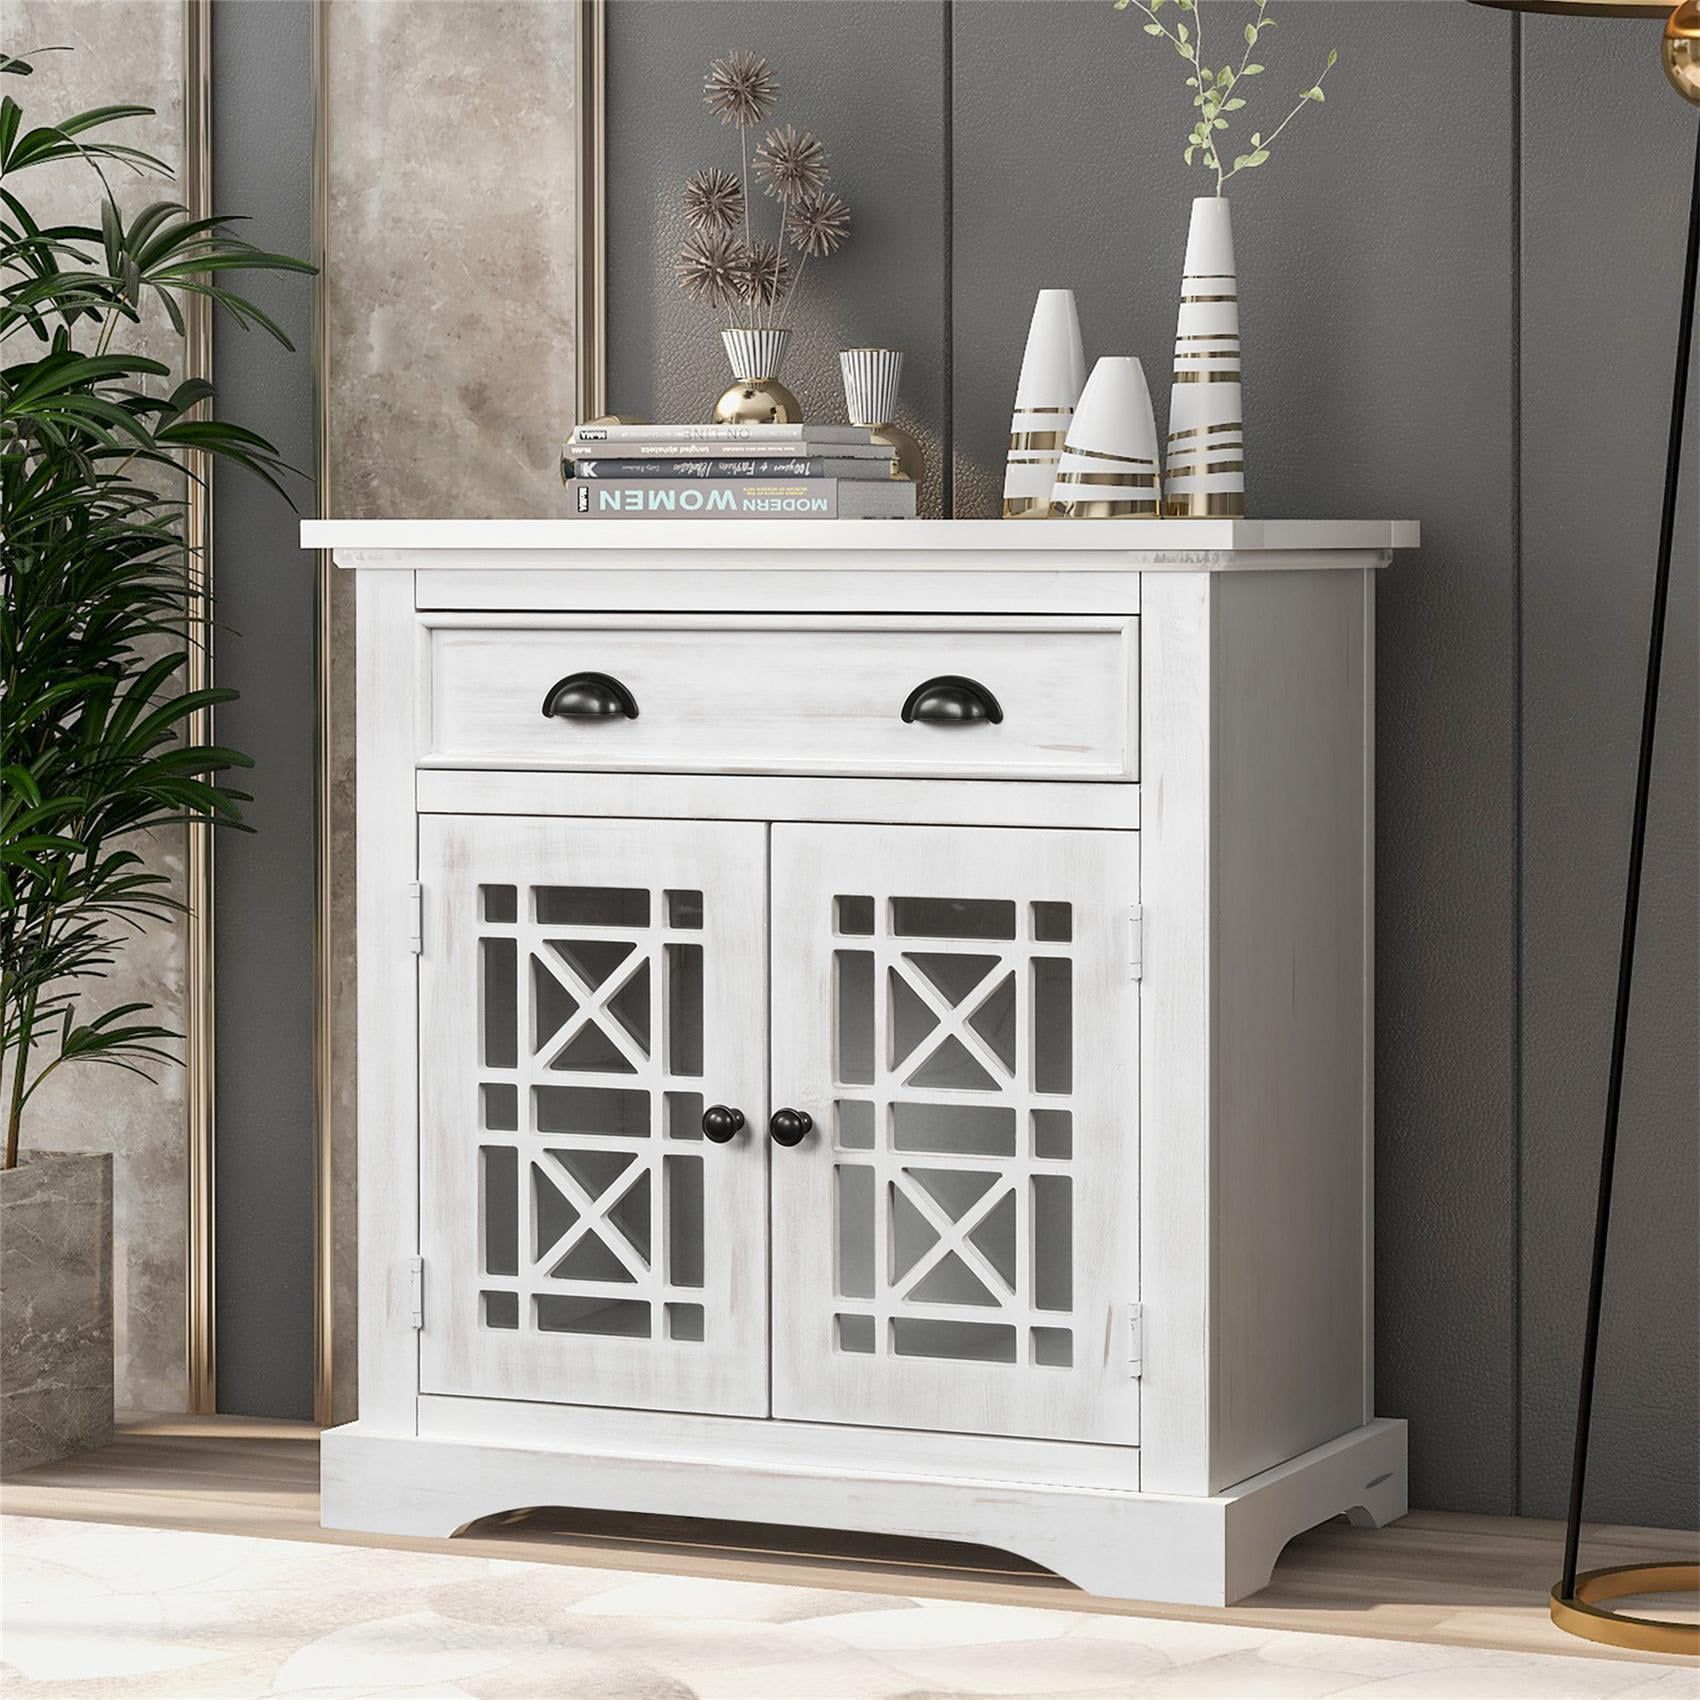 White Rectangular Storage Cabinet, Console Sofa Table Wih Cabinet And In Freestanding Tables With Drawers (Gallery 8 of 20)